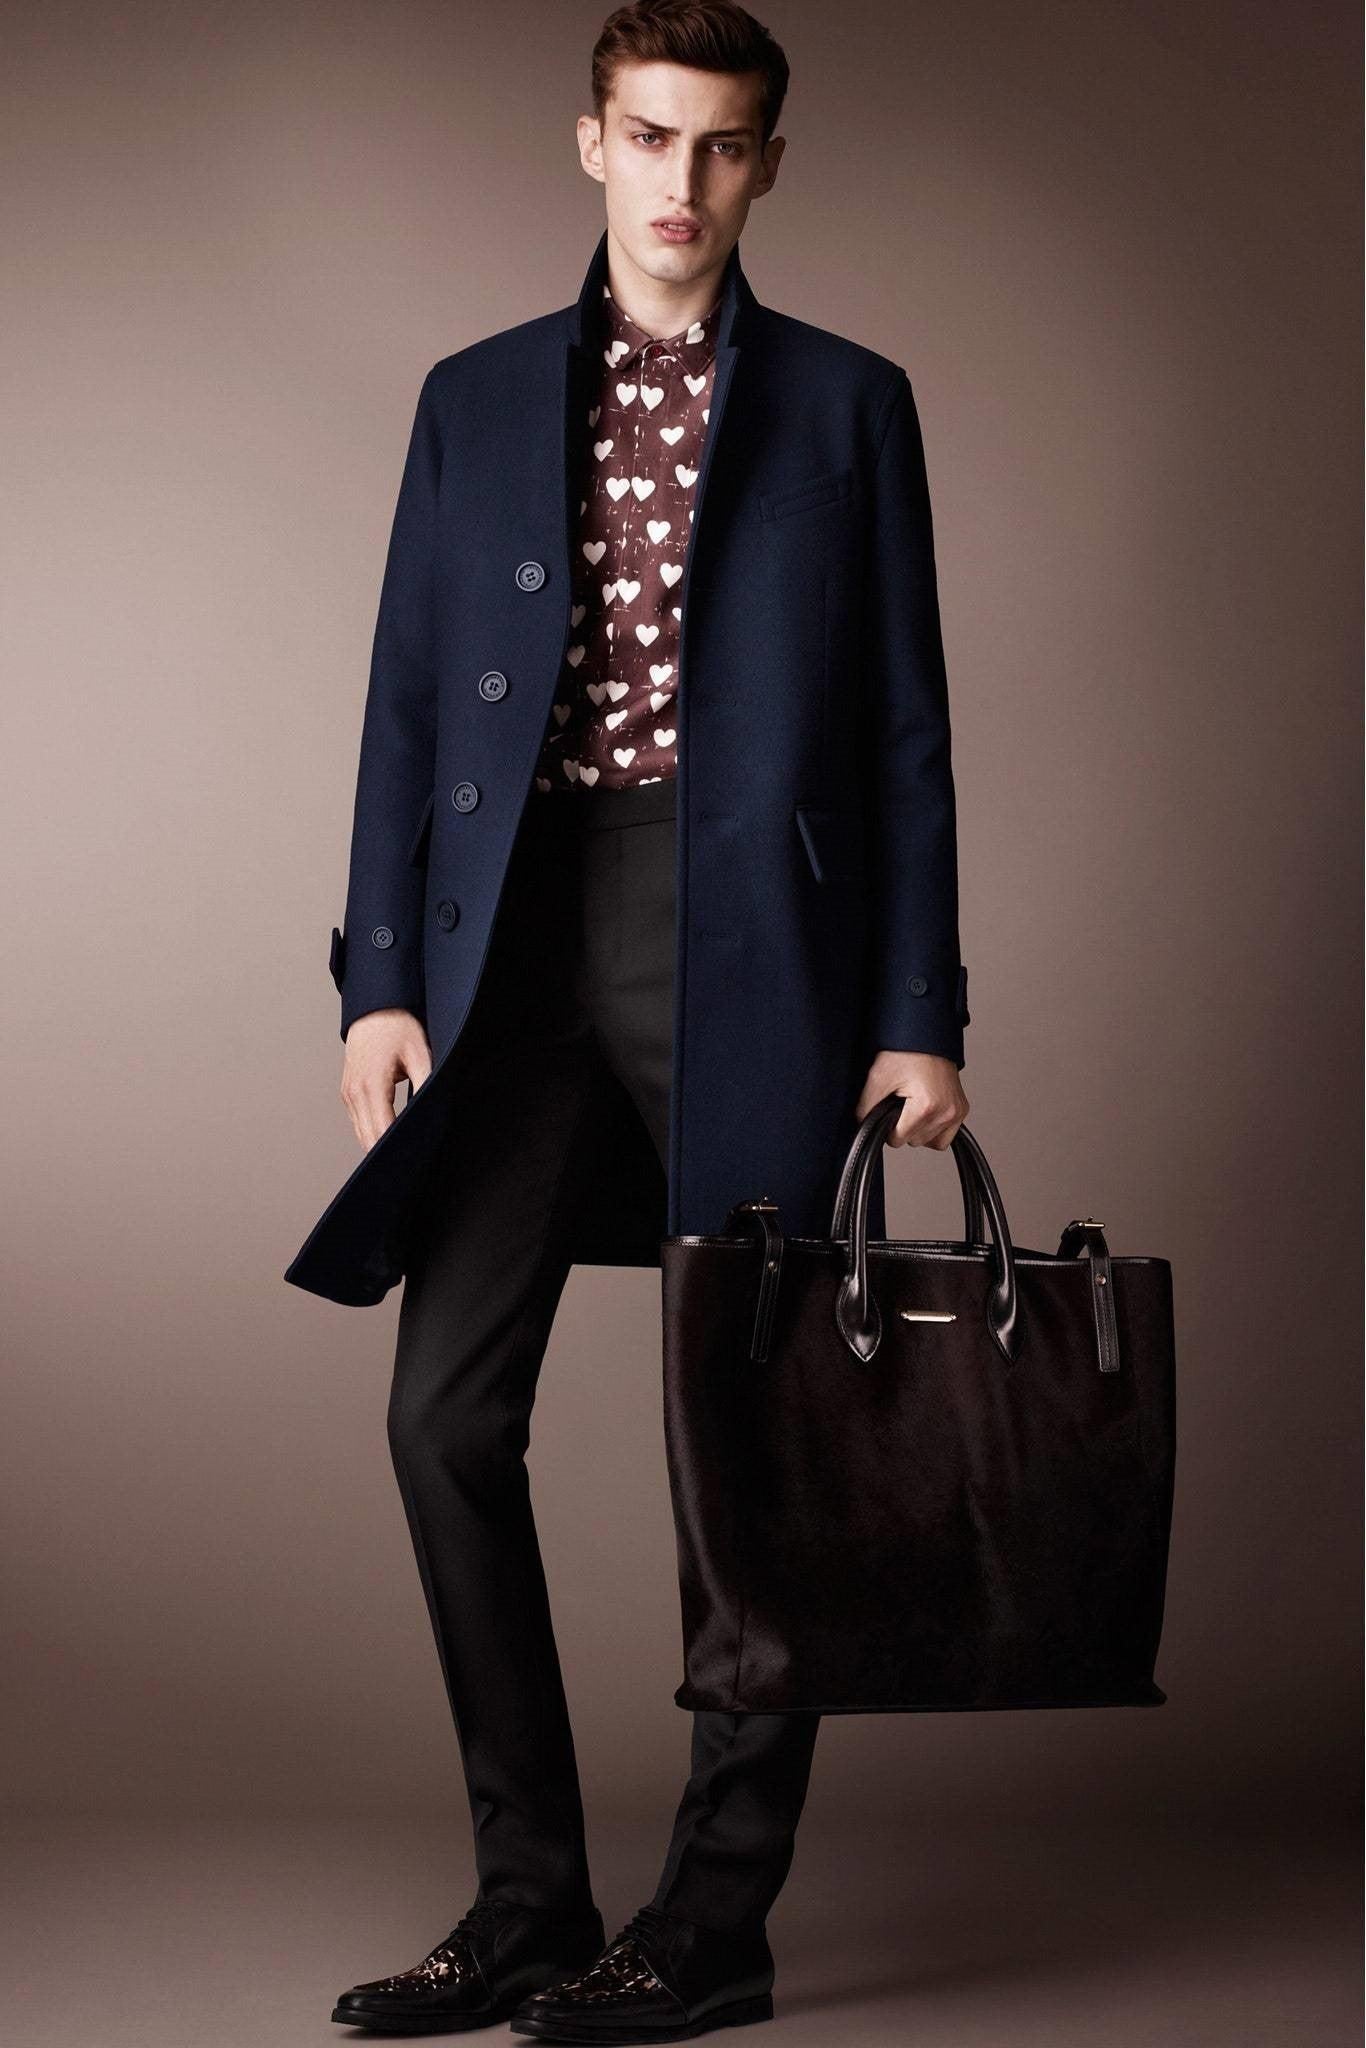 Burberry Prorsum Pre-Fall 2013 Navy Blue Overcoat by Christopher Bailey, lightweight, logo lining, collar, slit pockets and four button closure. Made in Italy.Very Good Condition. Light wear. 

Marked: 
 IT48 

Measurements: 
 Chest: 38 inches